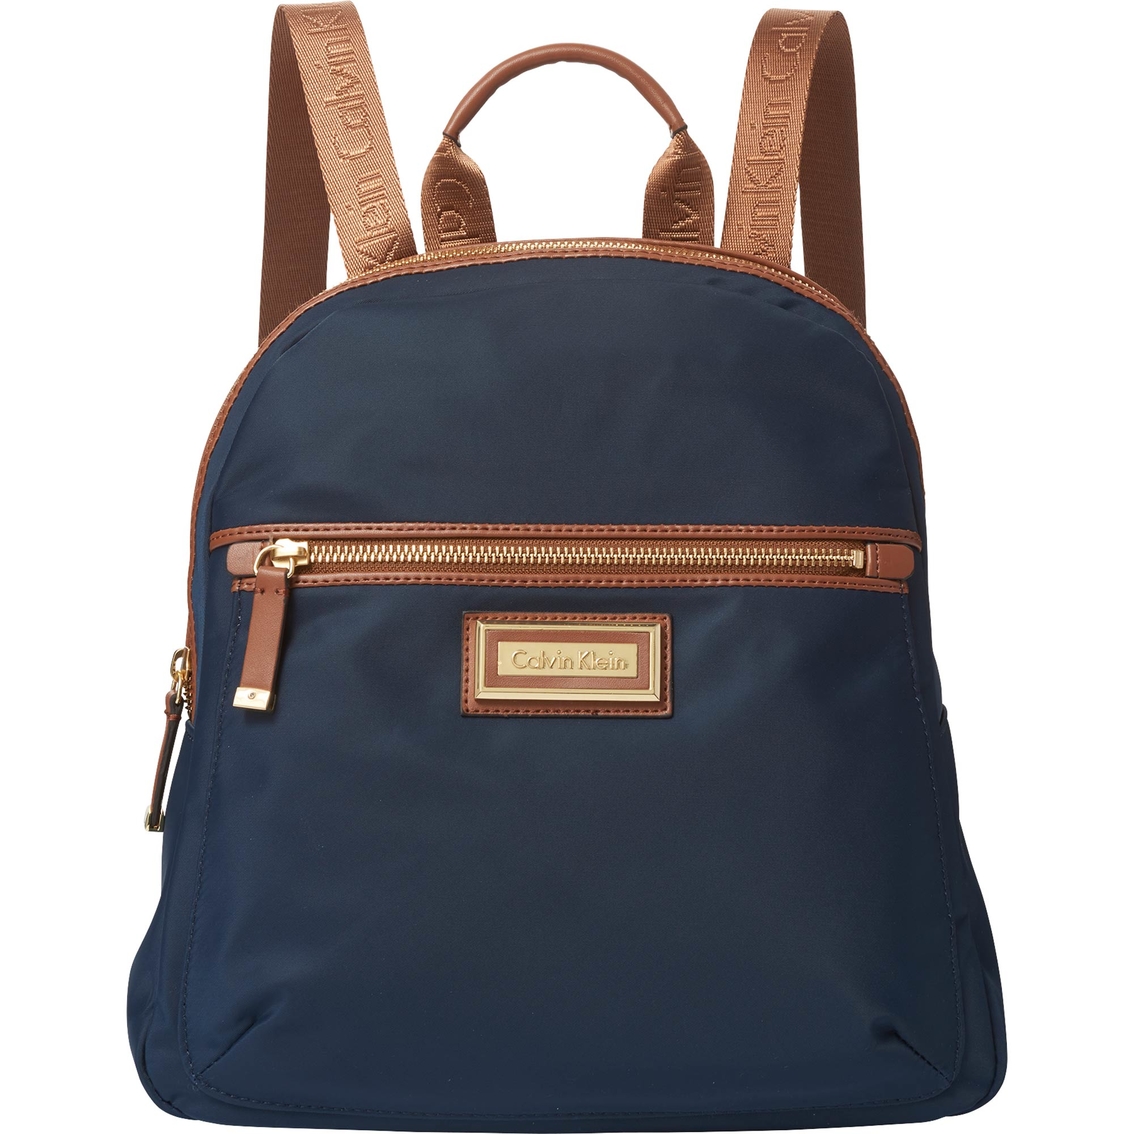 Calvin Klein Nylon Backpack | Backpacks | Clothing & Accessories | Shop ...